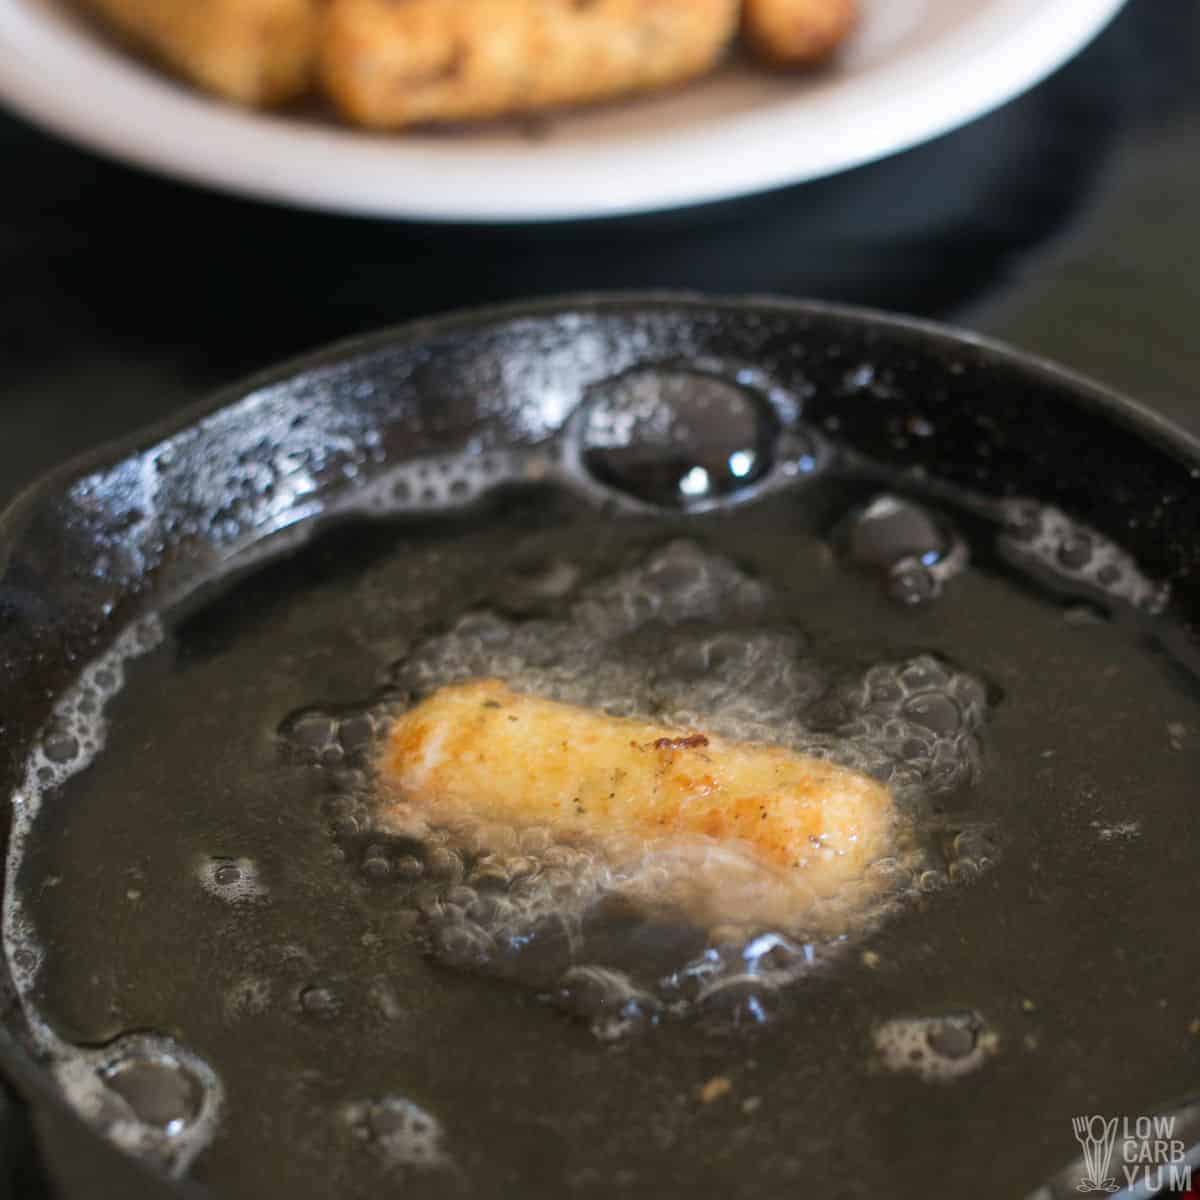 cooking a cheese stick in hot oil.